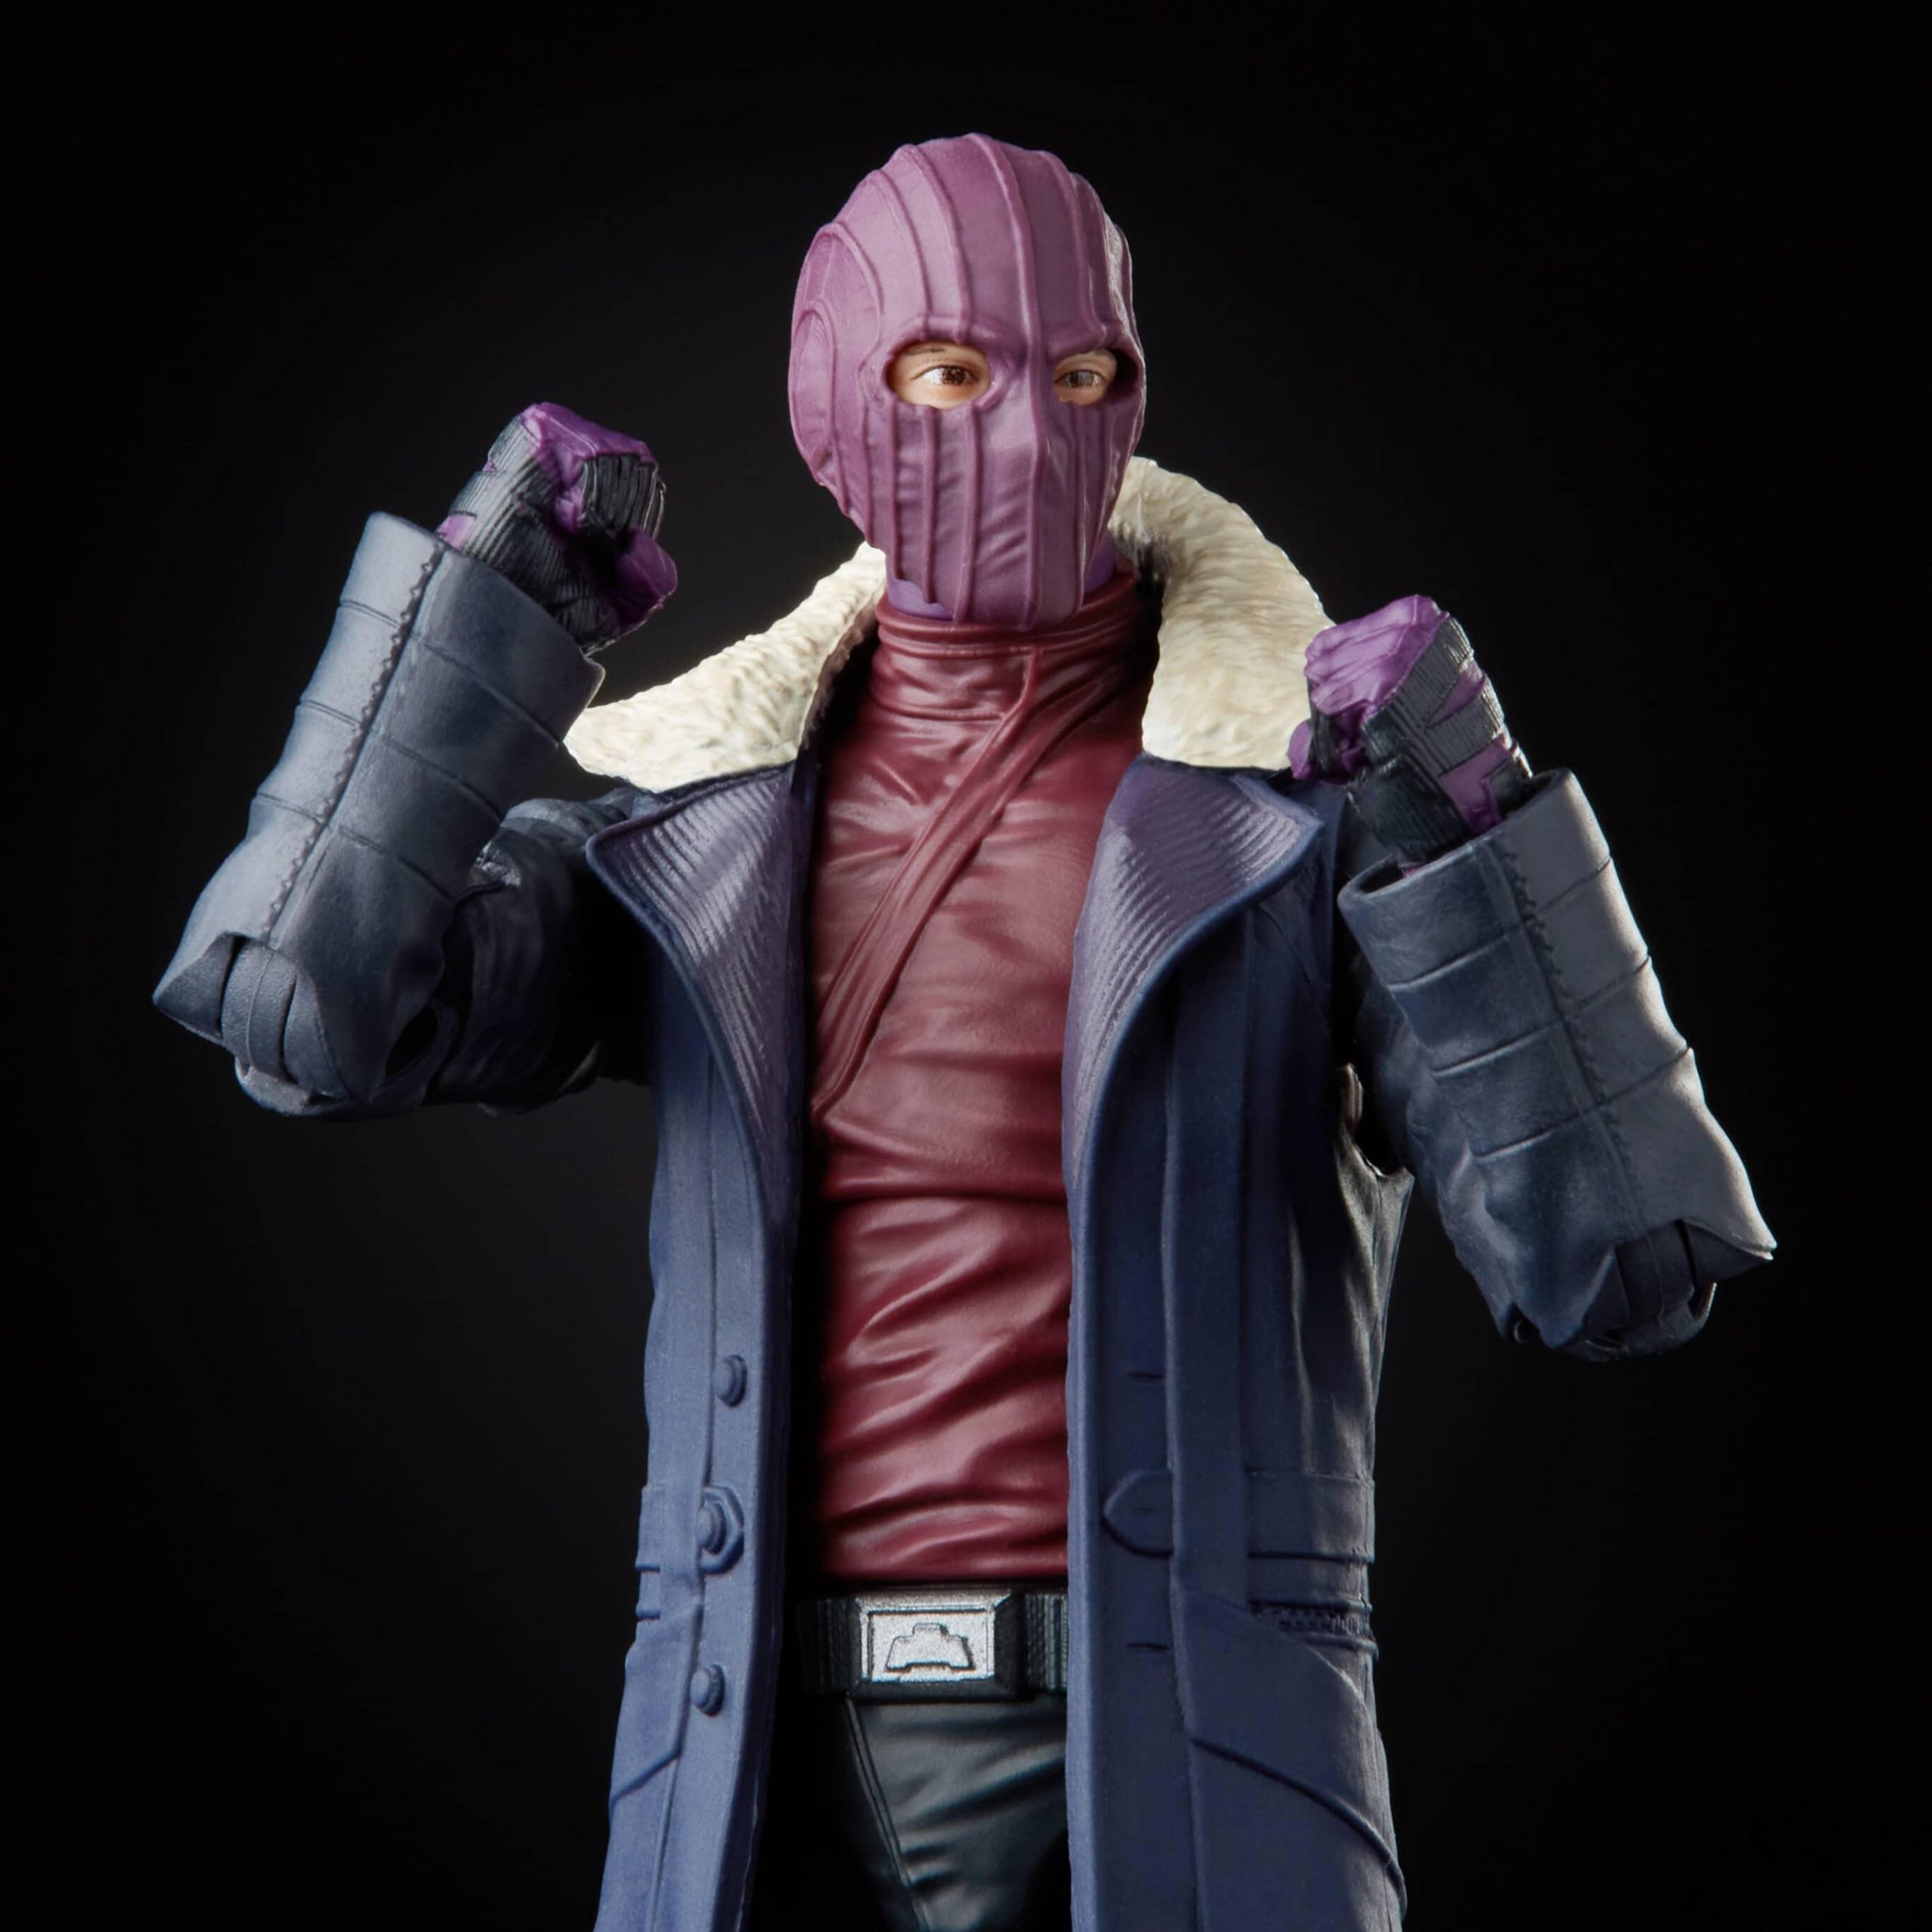 The Falcon and the Winter Soldier: Baron Zemo Marvel Legends figure revealed!